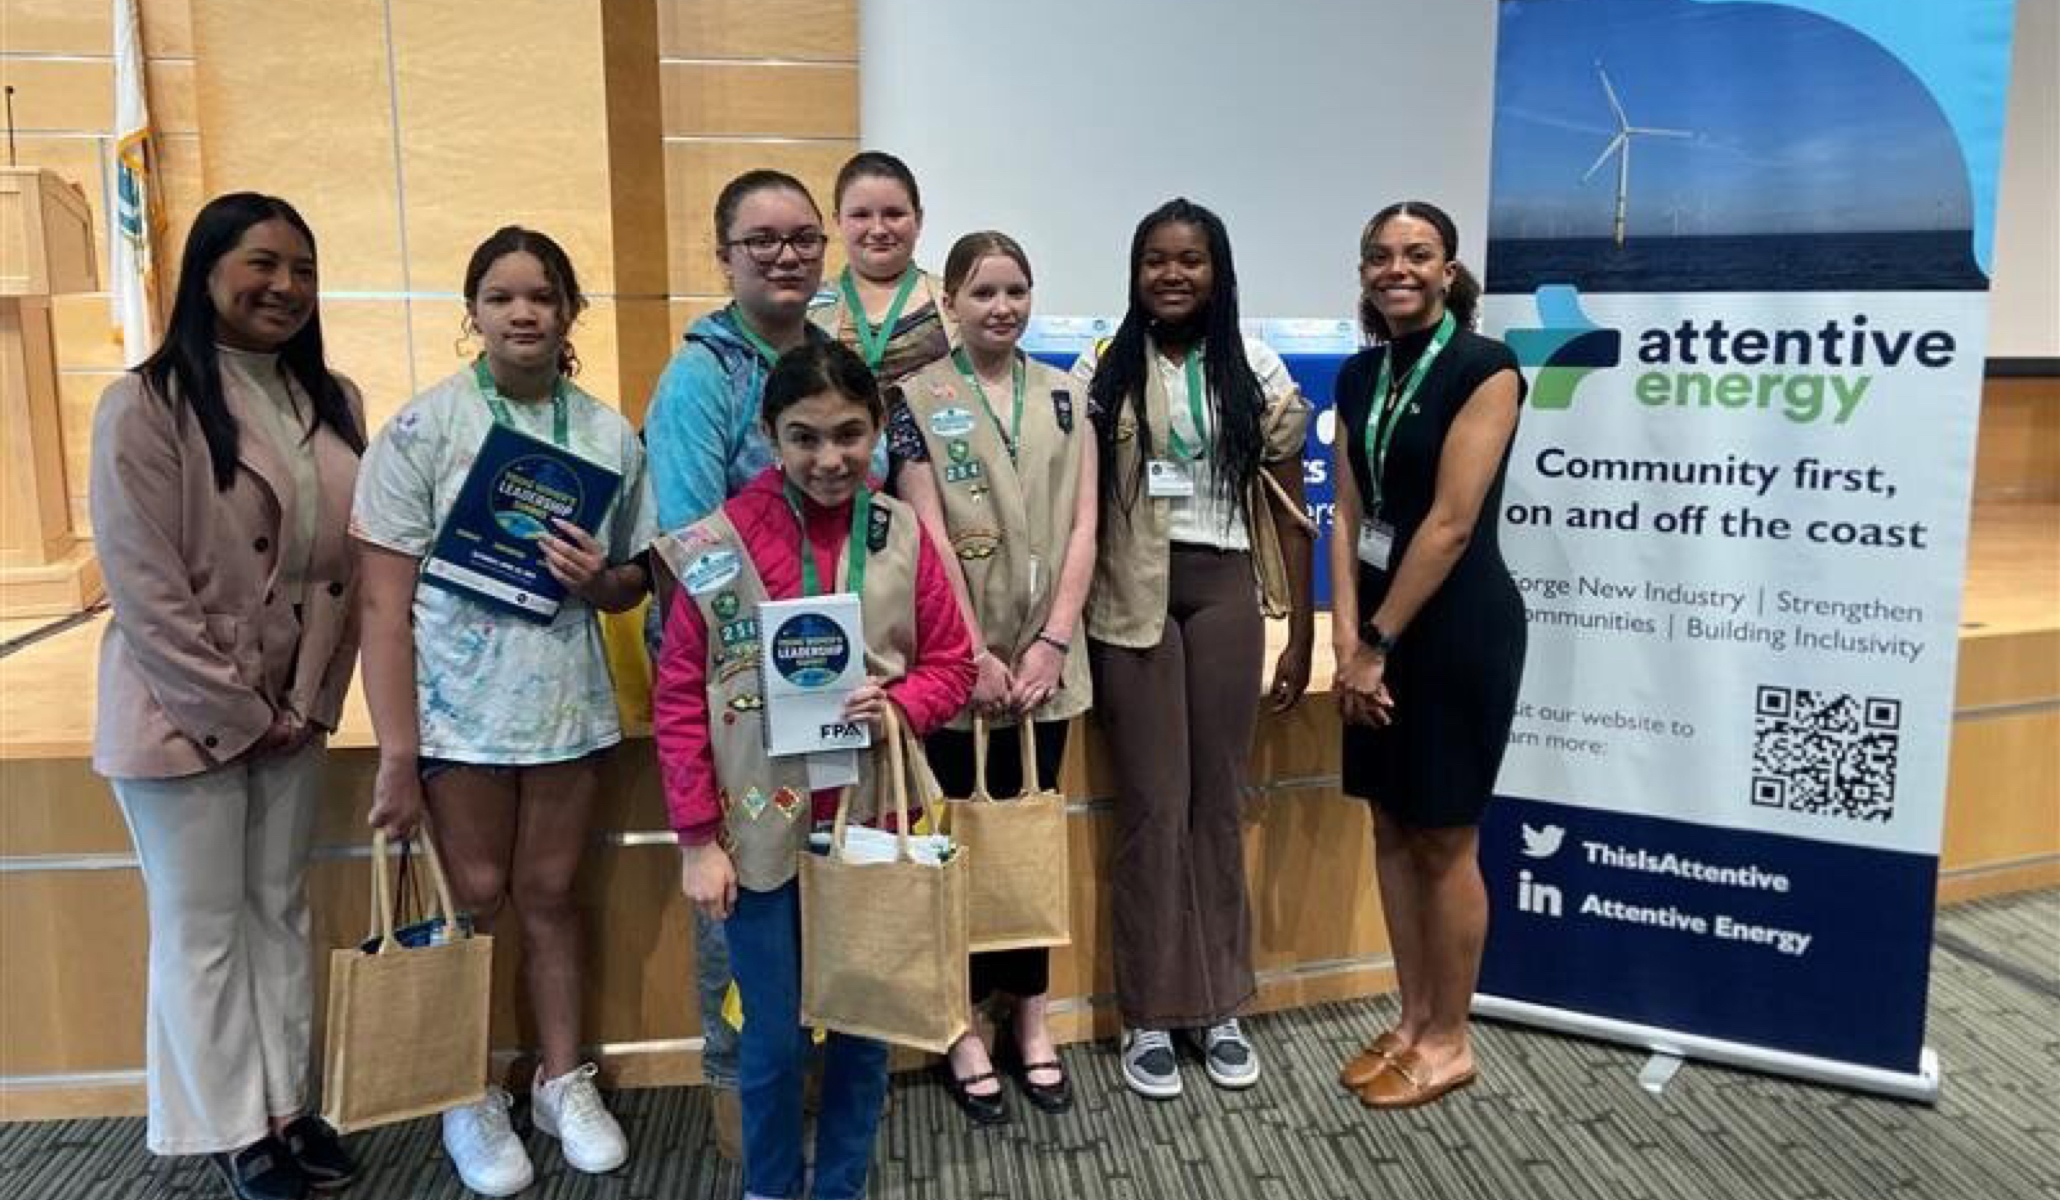 Attentive Energy attending the Girl Scouts of the Jersey Shore Summit at Ocean County College